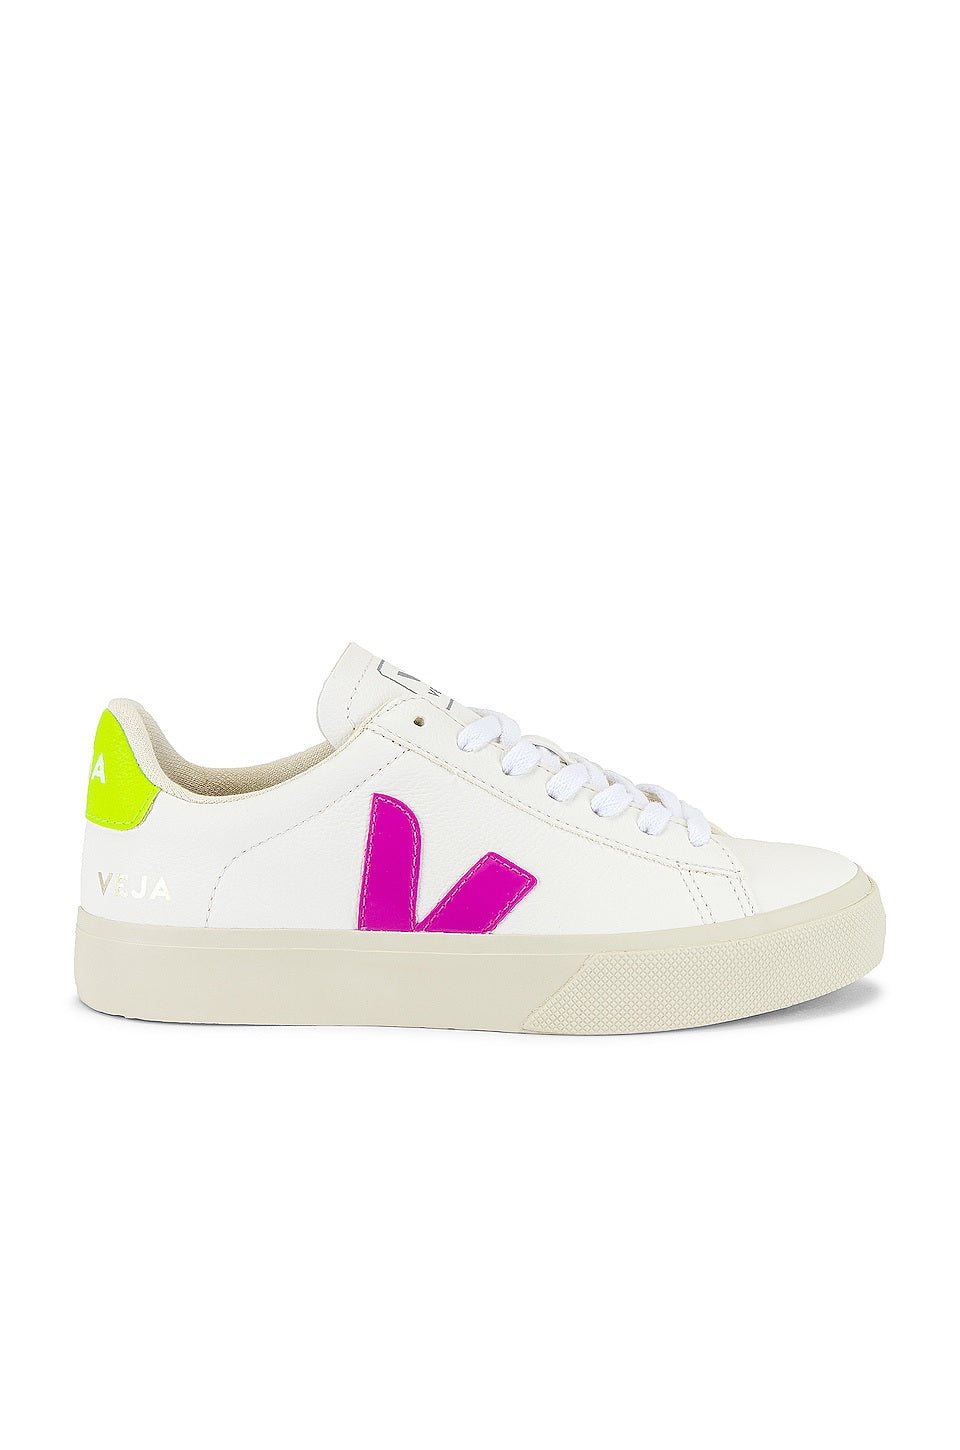 Veja Sneakers- Campo Chromefree Leather Extra White Ultraviolet Jaune Fluo